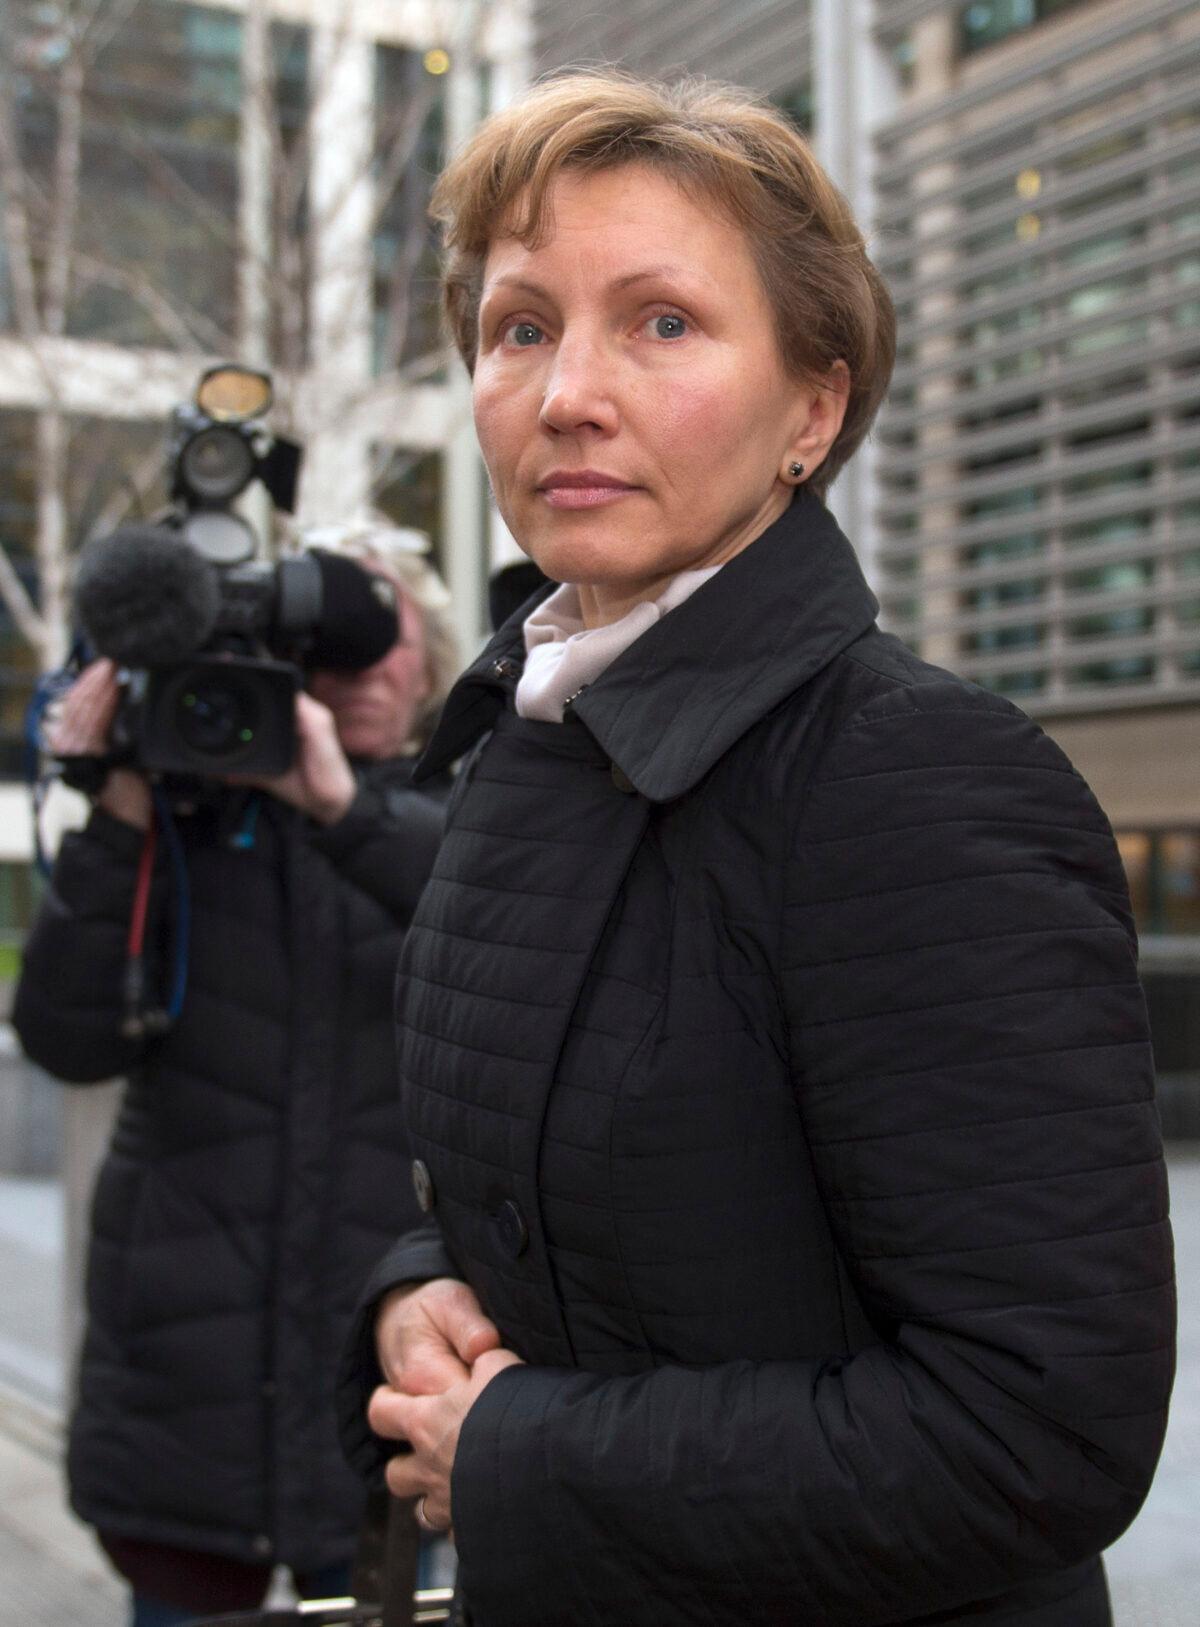 Marina Litvinenko, the wife of former Russian spy Alexander Litvinenko, leaves the Home Office in London following a meeting with then Home Secretary Theresa May, on Jan. 28, 2016. (Anthony Devlin/PA)